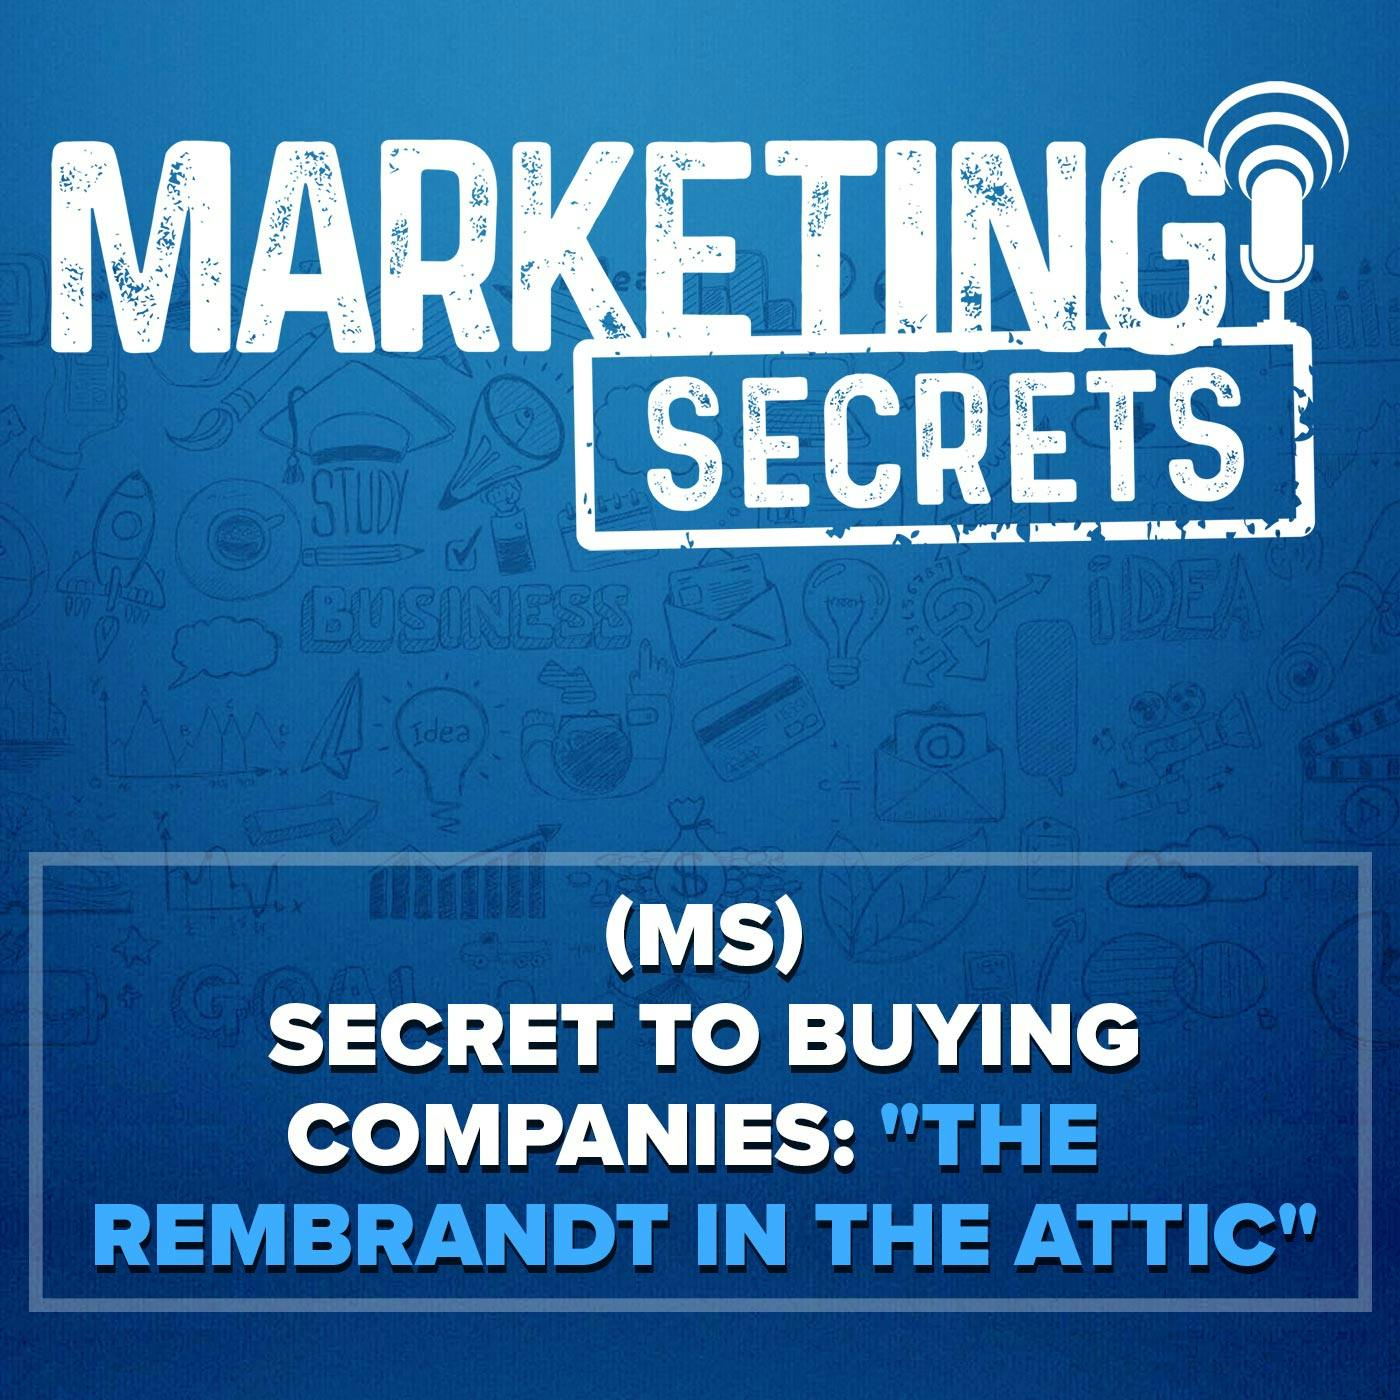 (MS) Secret to Buying Companies: ”The Rembrandt in the Attic”